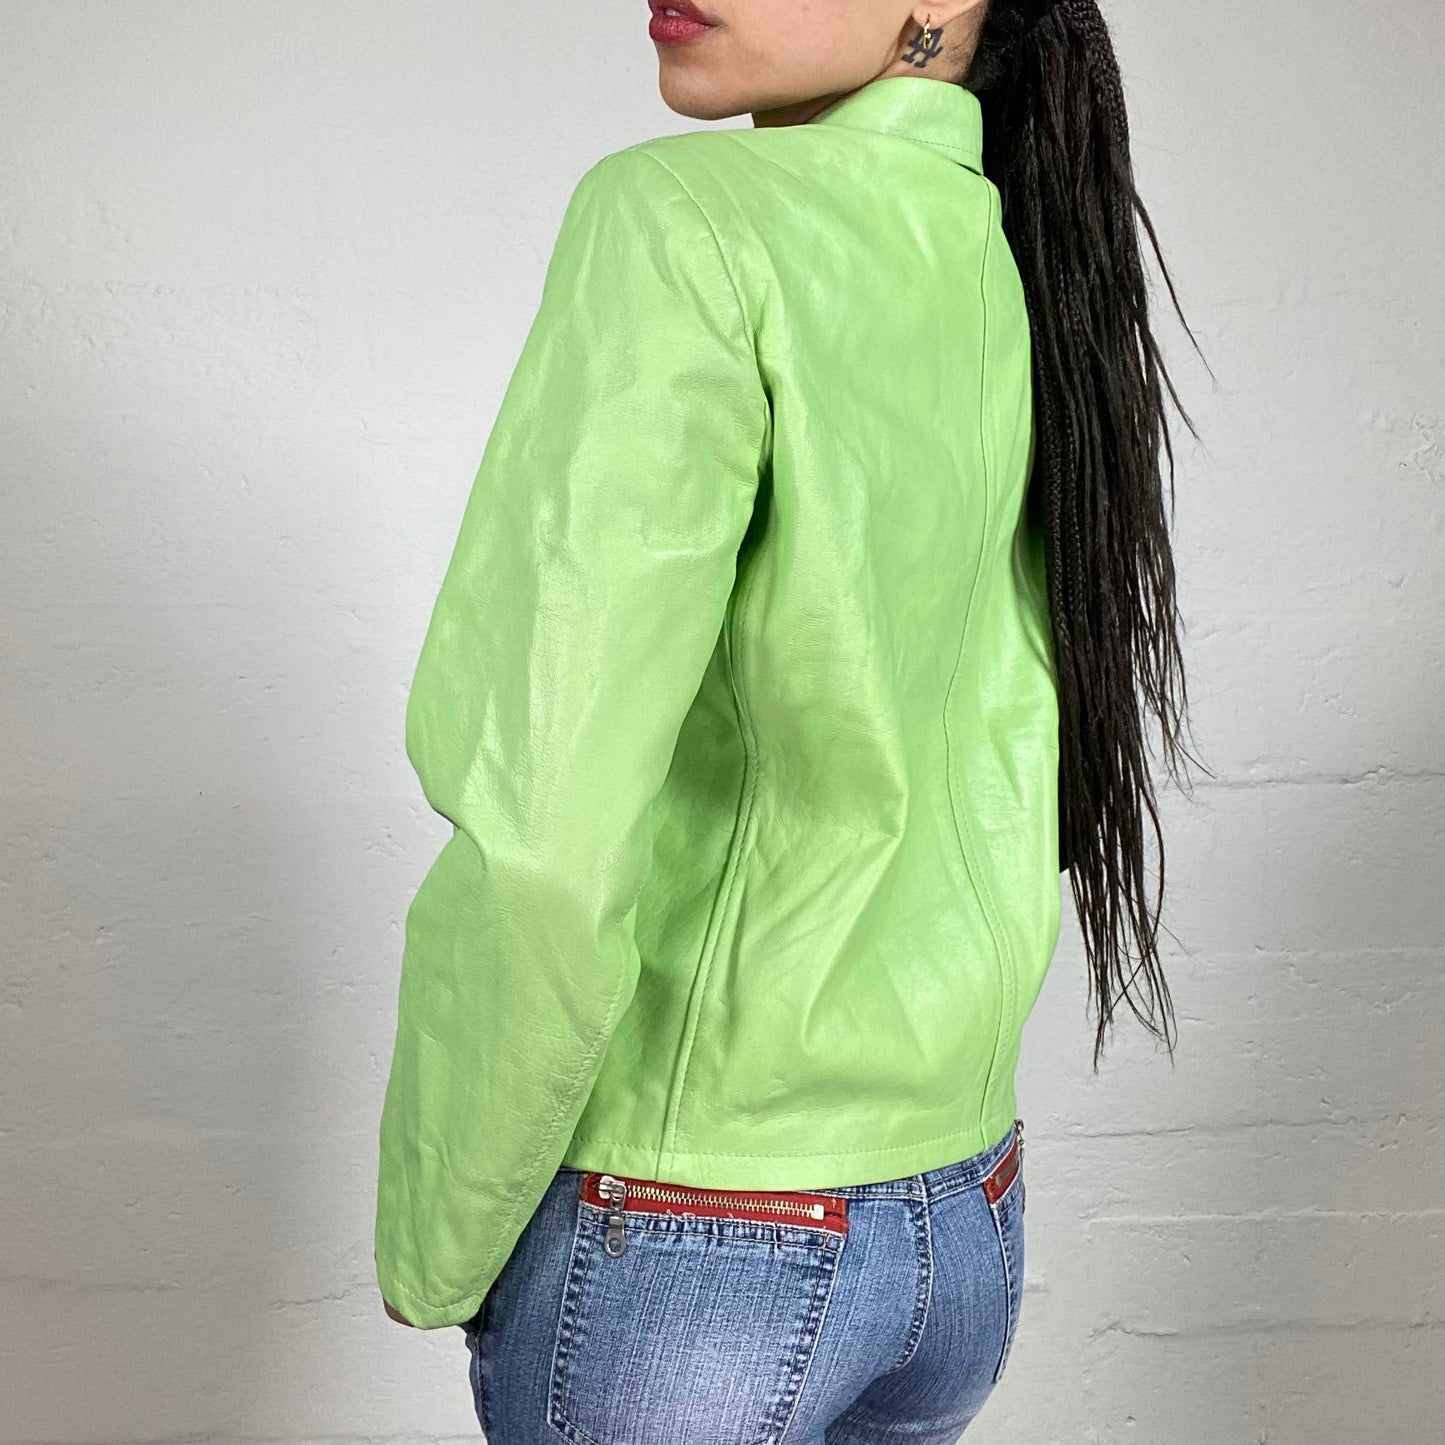 Vintage 90’s Spring Soft Girl Lime Green Zip Up Leather Jacket with Classic Collar (44)